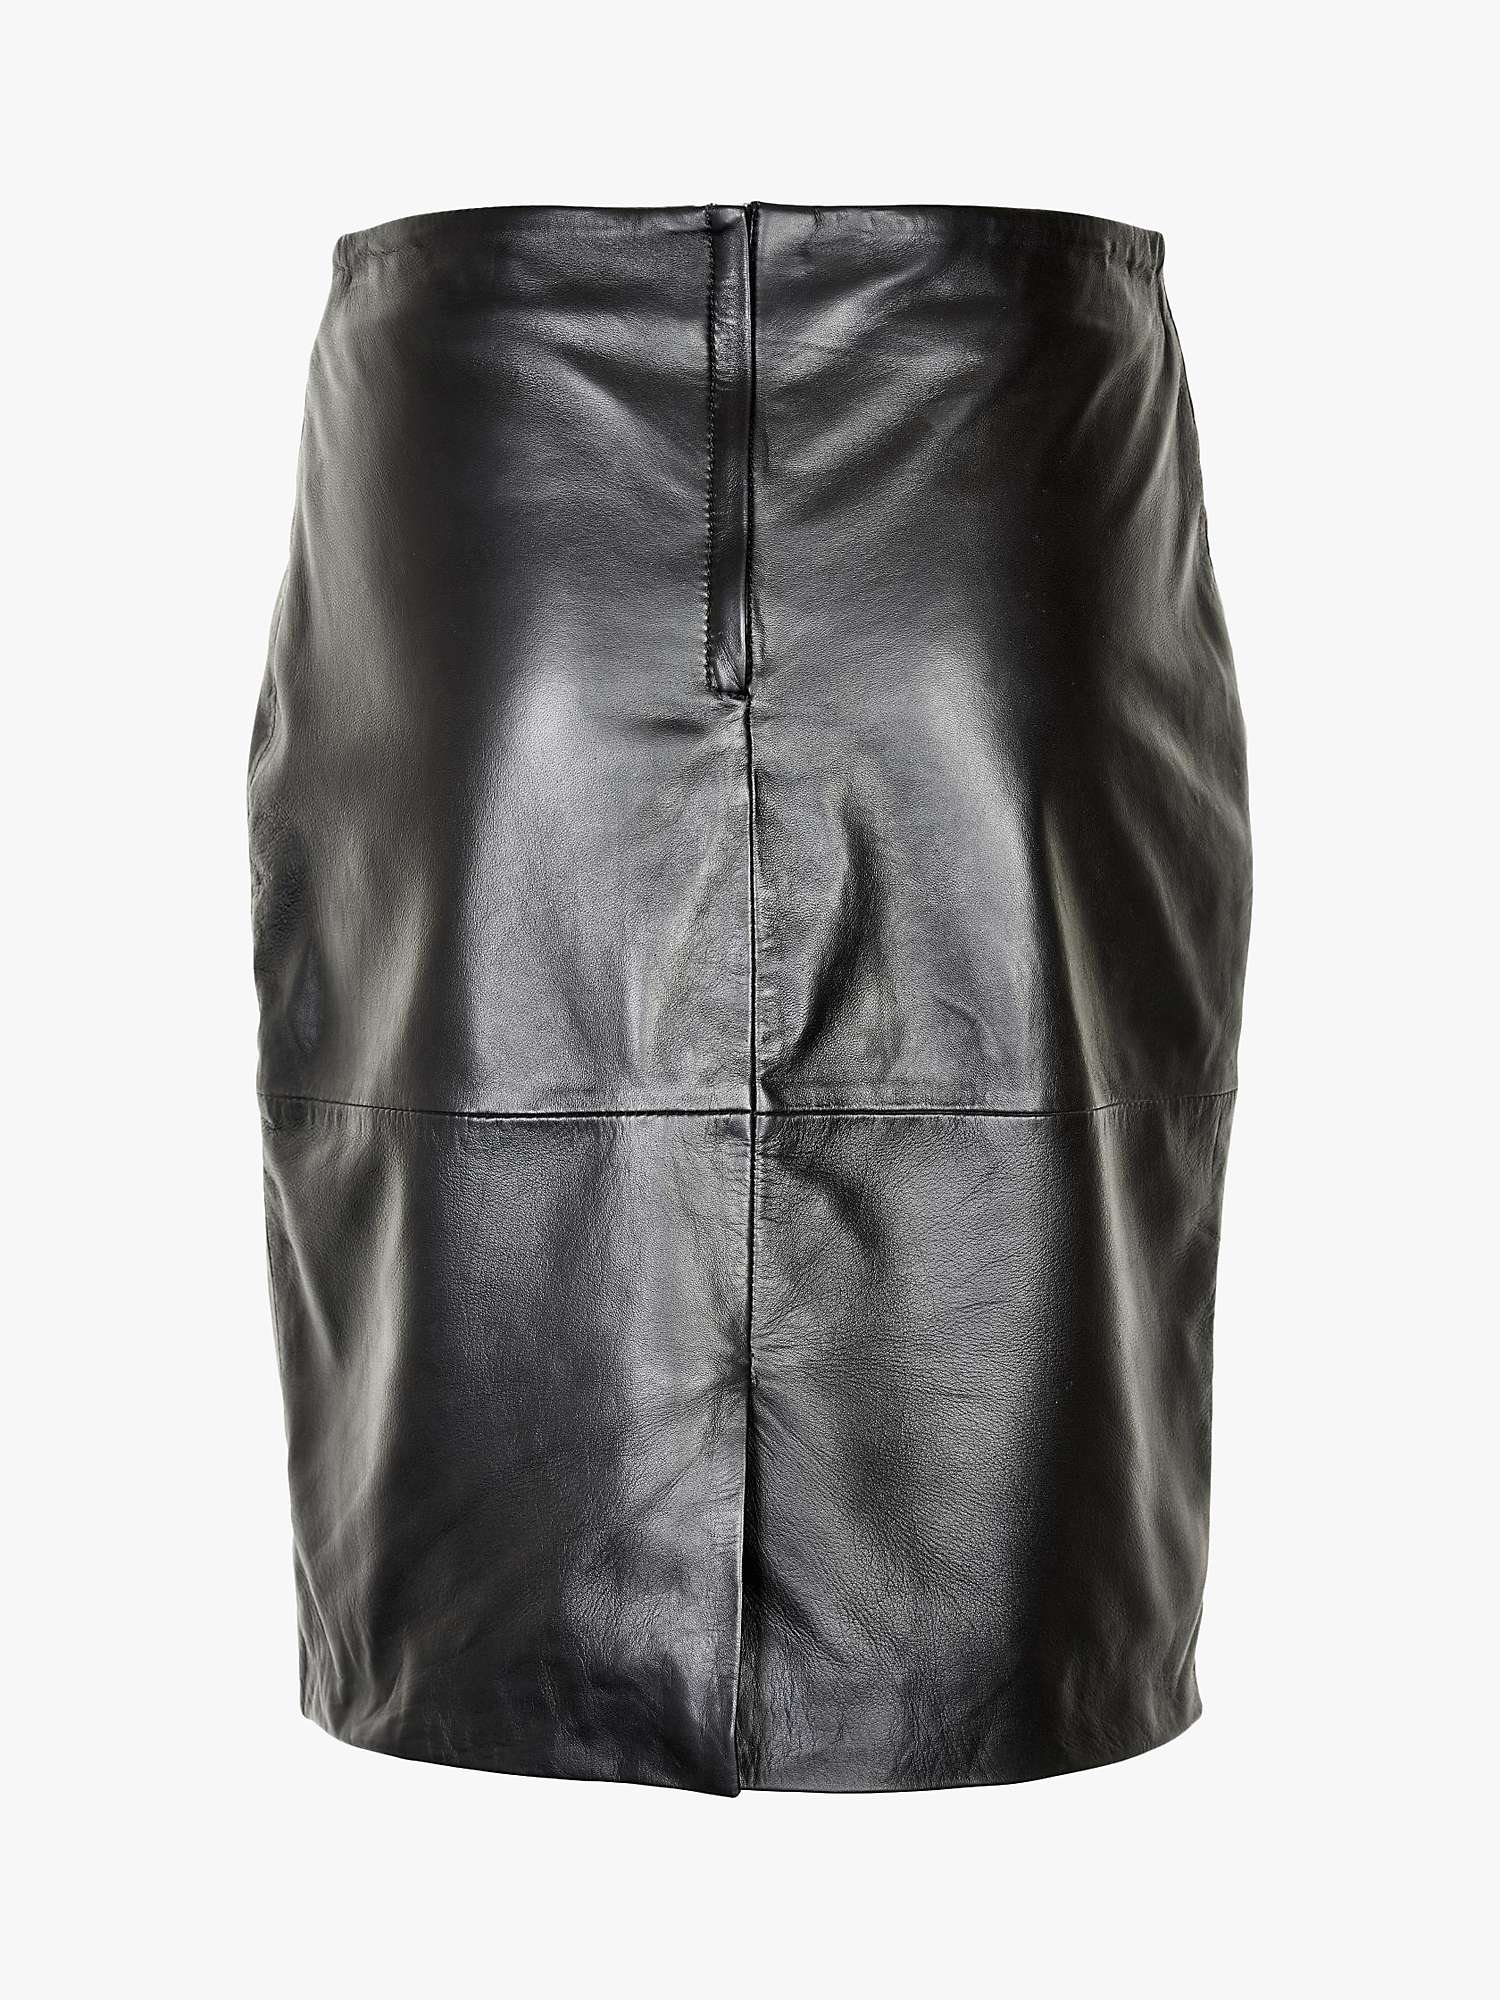 Buy Soaked In Luxury Folly Pencil Leather Skirt, Black Online at johnlewis.com